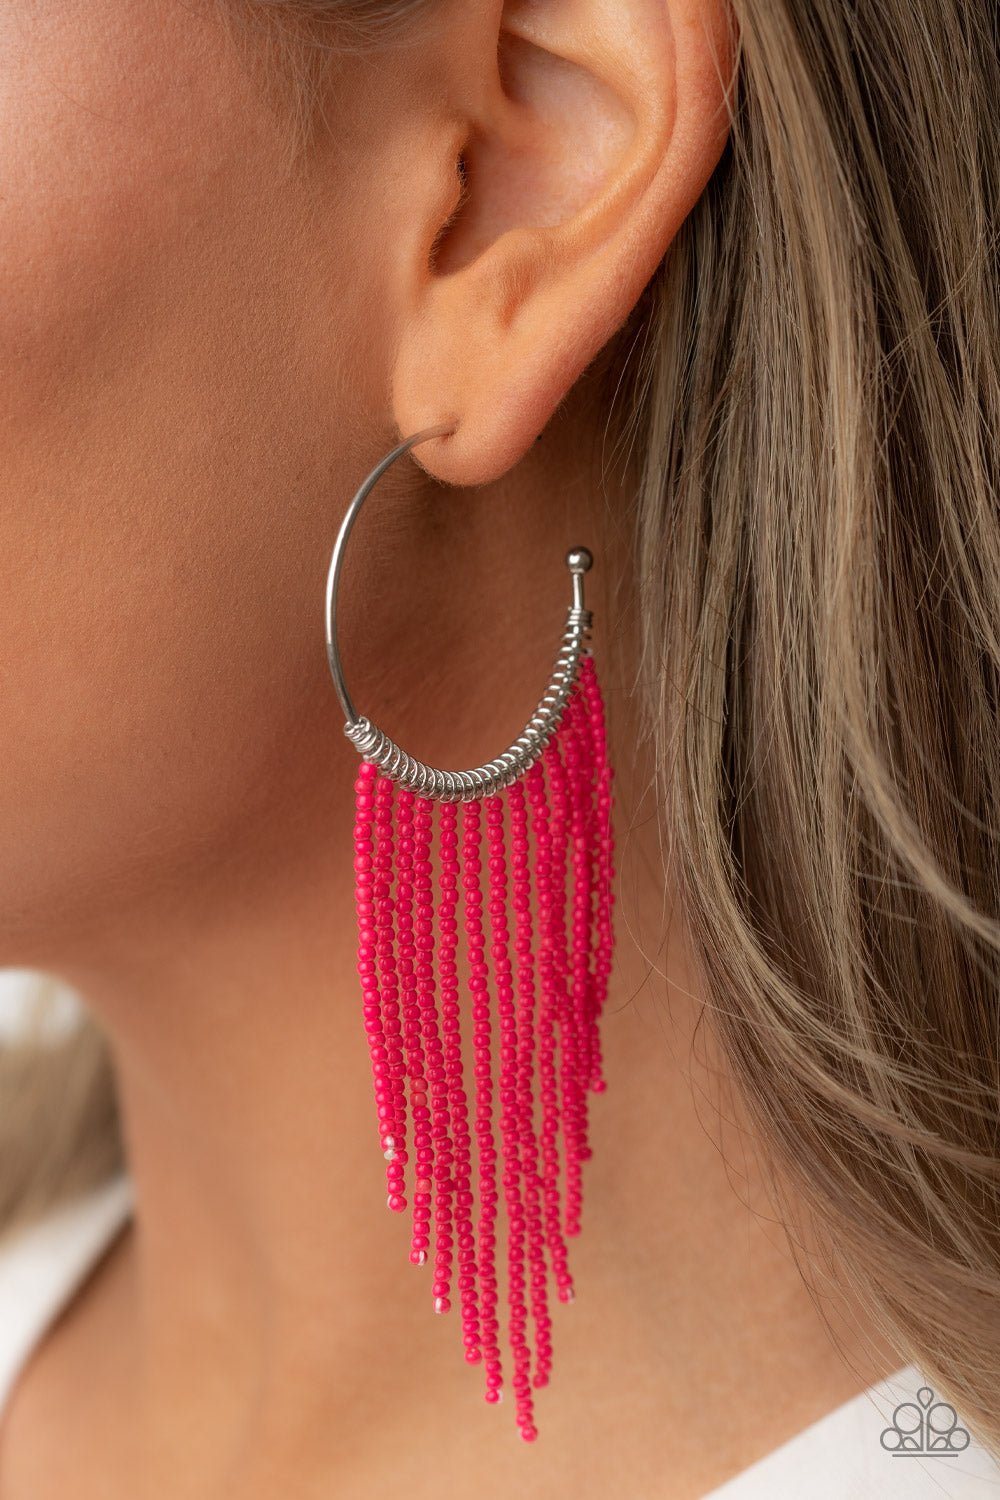 Saguaro Breeze Pink Hoop Earring - Paparazzi Accessories  Strands of dainty pink seed beads stream out from the bottom of a classic silver hoop, resulting in a flirtatiously tasseled look. Earring attaches to a standard post fitting. Hoop measures approximately 1 1/2" in diameter.  Sold as one pair of hoop earrings.